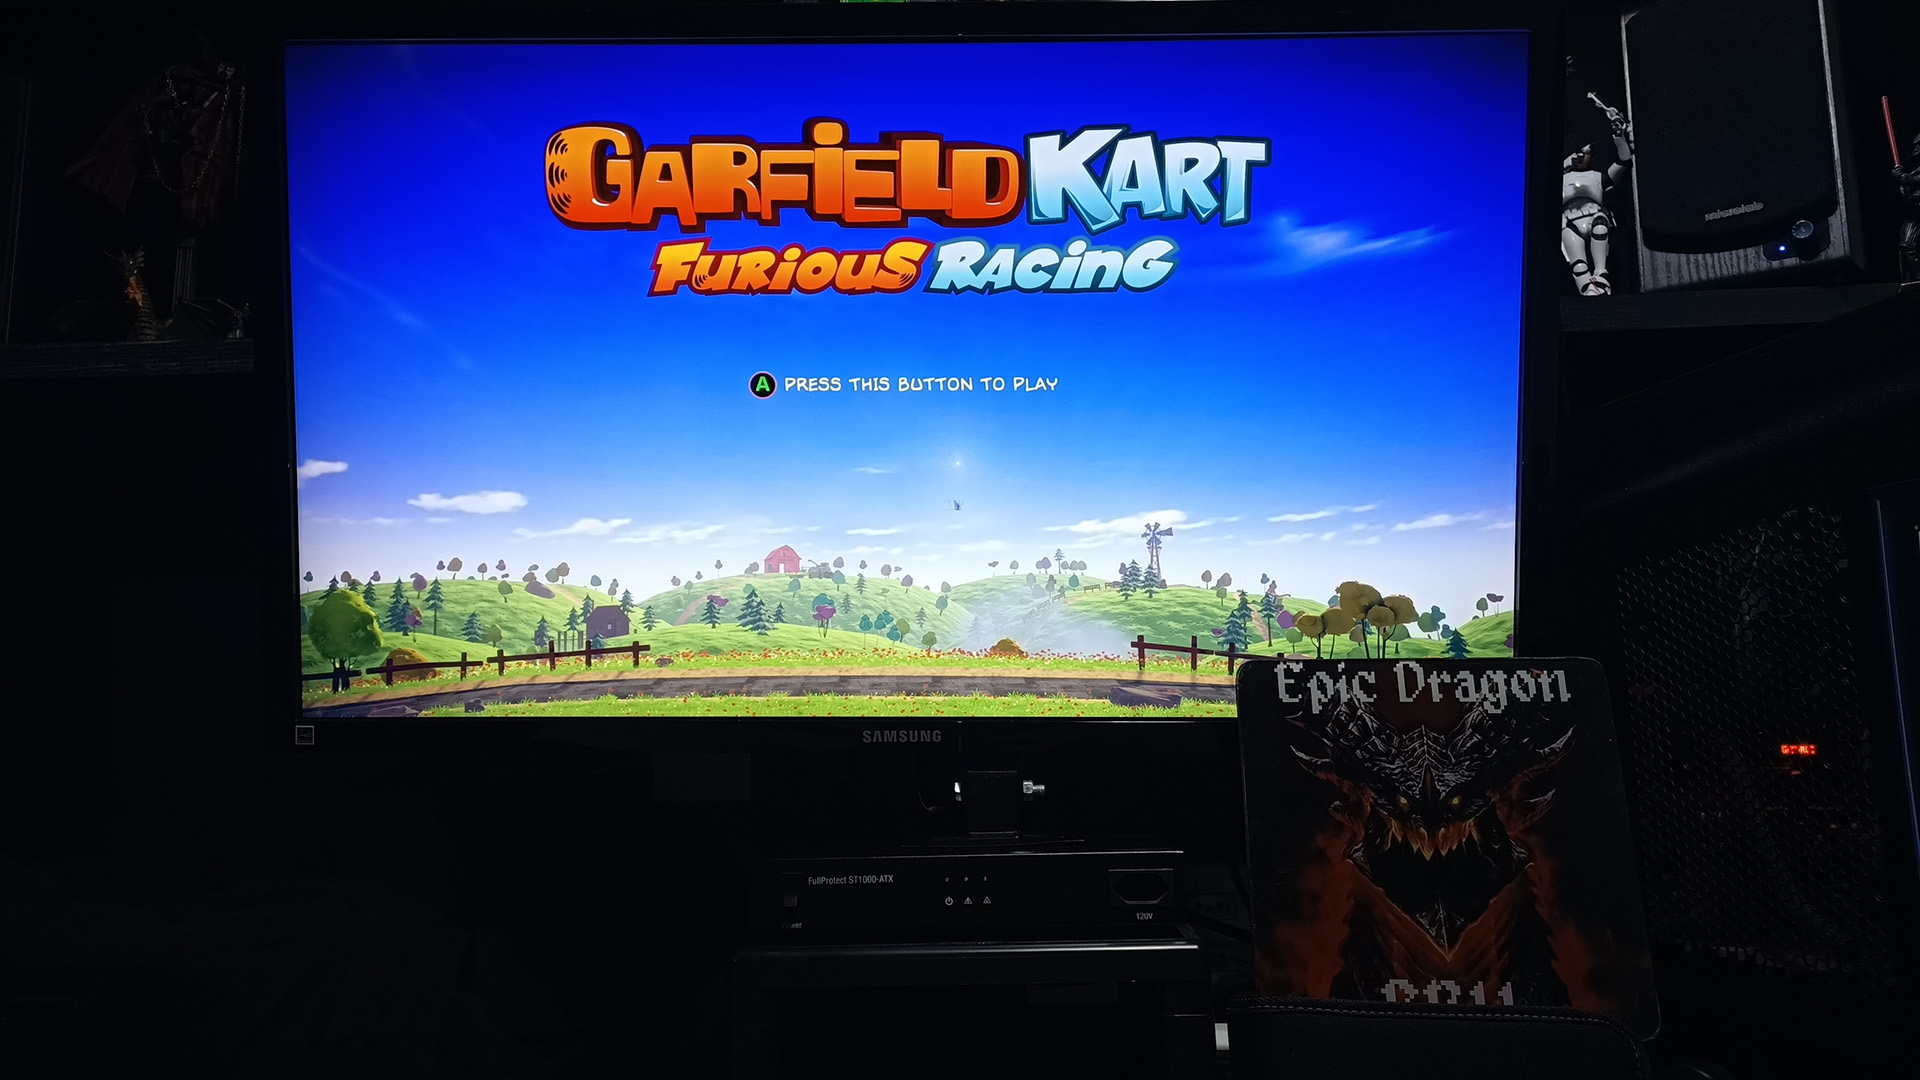 Garfield Kart Furious Racing: Spooky Manor [Time Trial: 3 Laps] time of 0:02:17.42